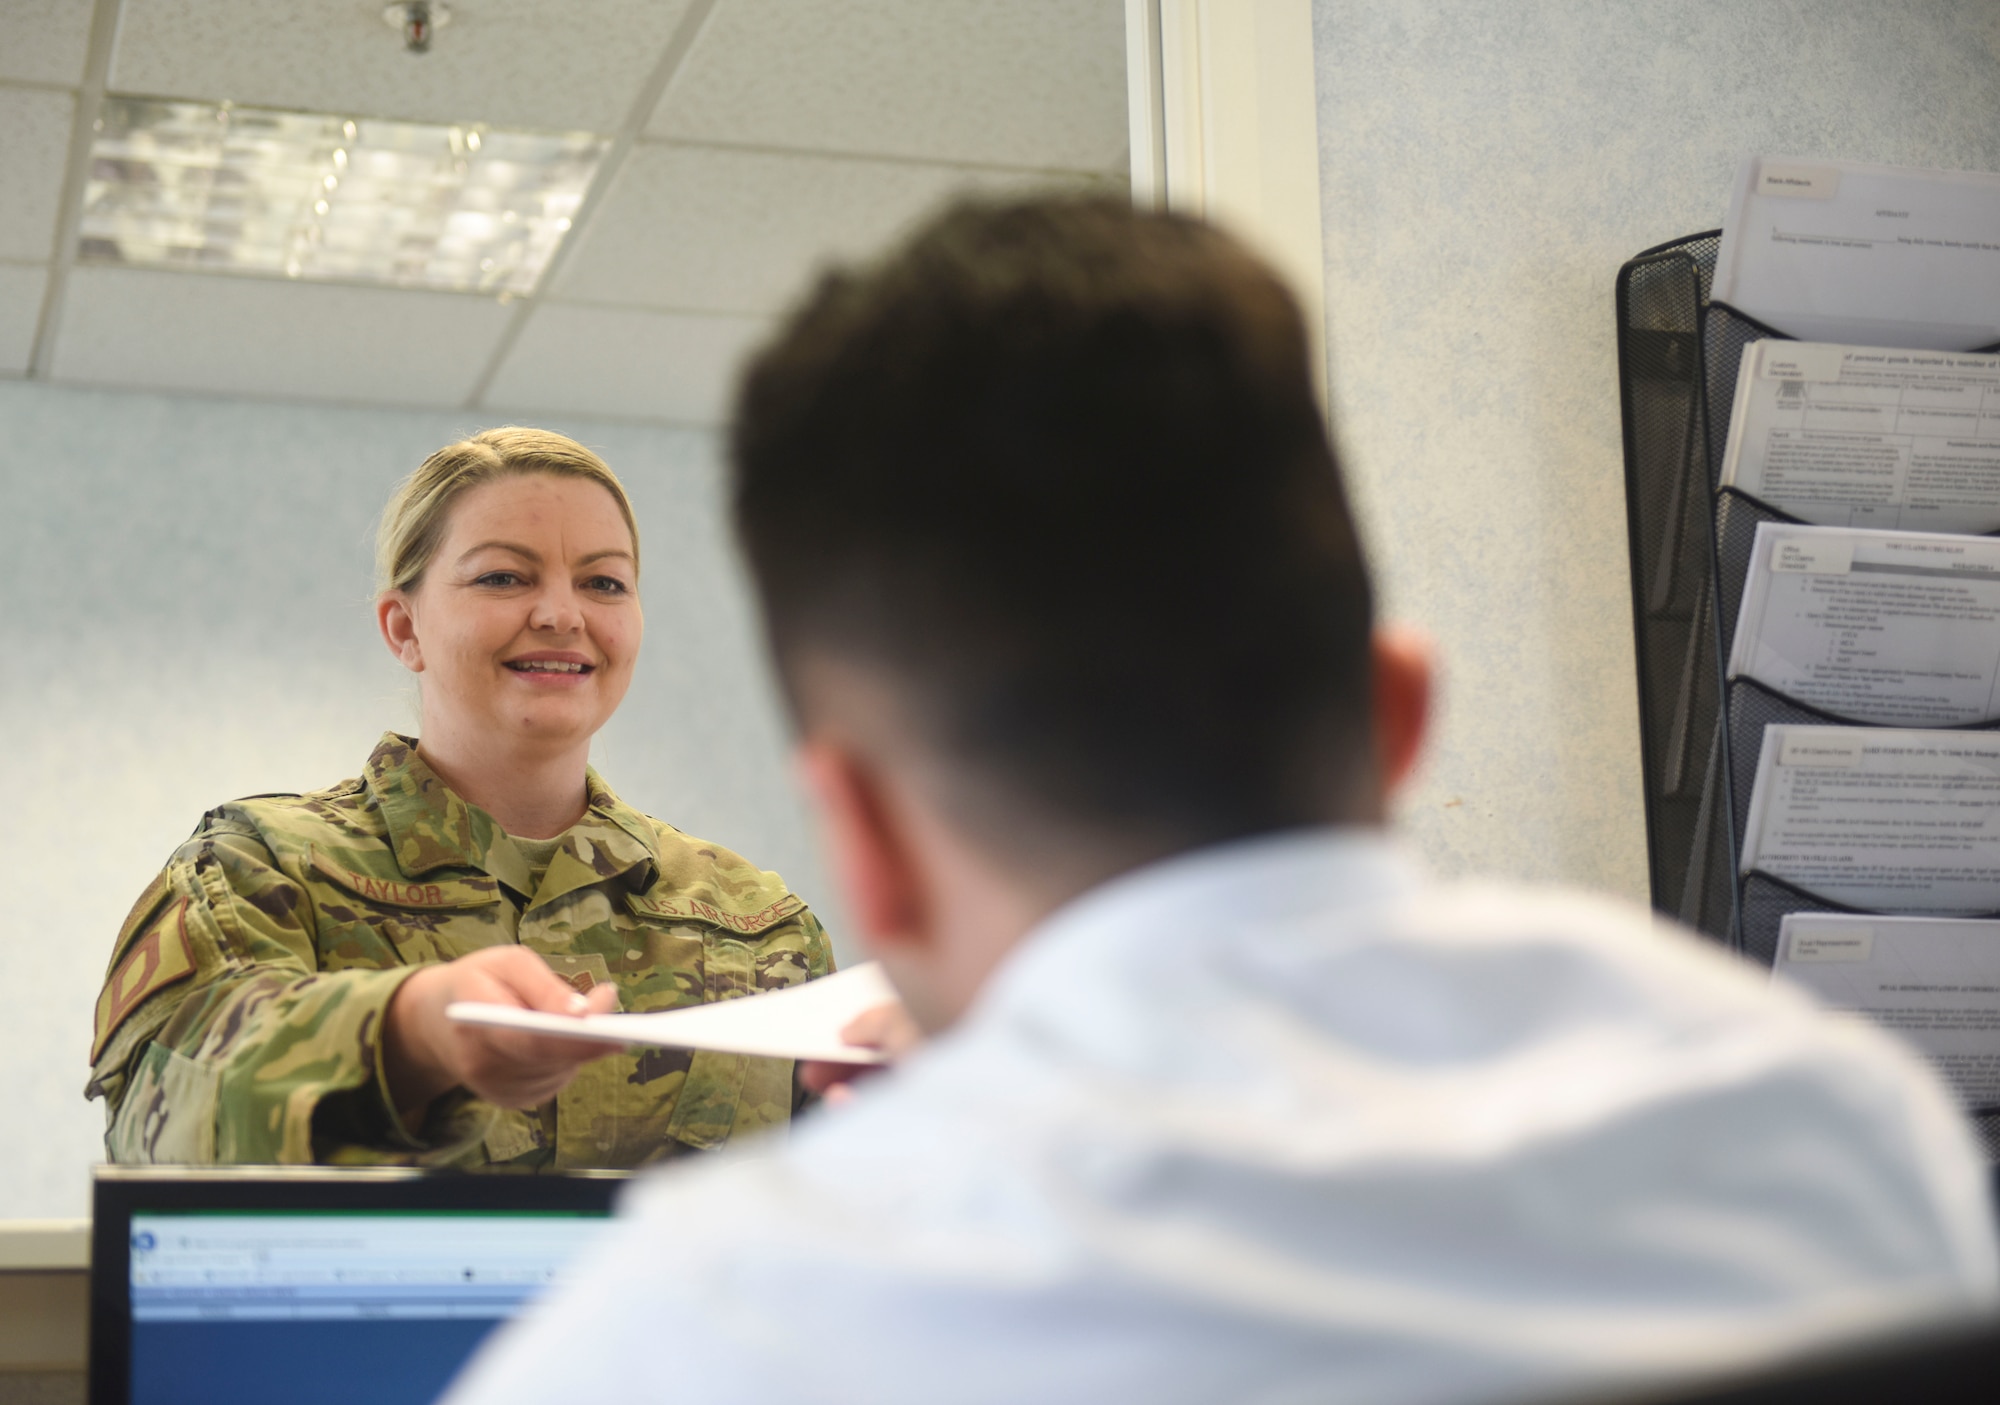 U.S. Air Force Tech. Sgt. Devan Taylor, 100th Air Refueling Wing judge advocate NCO-in-charge of general law, hands paperwork to Alex Shaw, legal assistant, at the base legal office at RAF Mildenhall, England, May 24, 2019. The base legal office has saved Airmen and families $93,200 in services like power of attorneys, notaries, wills and legal assistance in 2019. (U.S. Air Force photo by Airman 1st Class Joseph Barron)